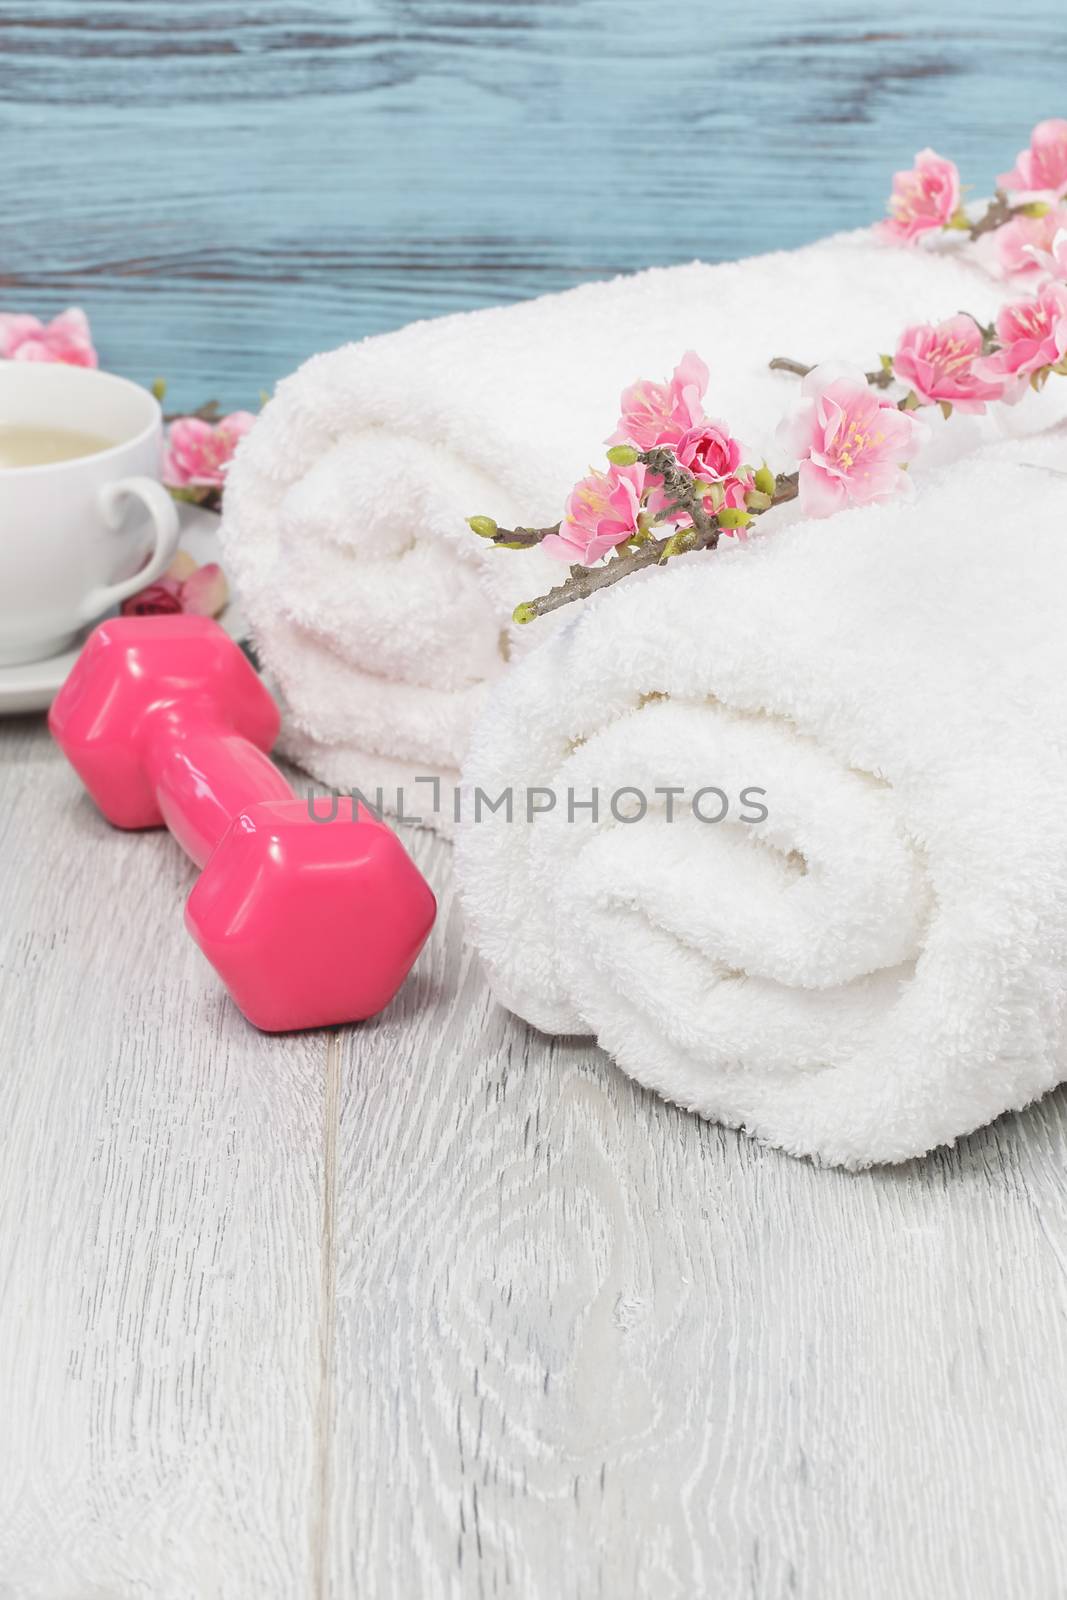 Fitness and healthy living concept with sport- hand weights, towel and tea. Macro photograph with shallow depth of field